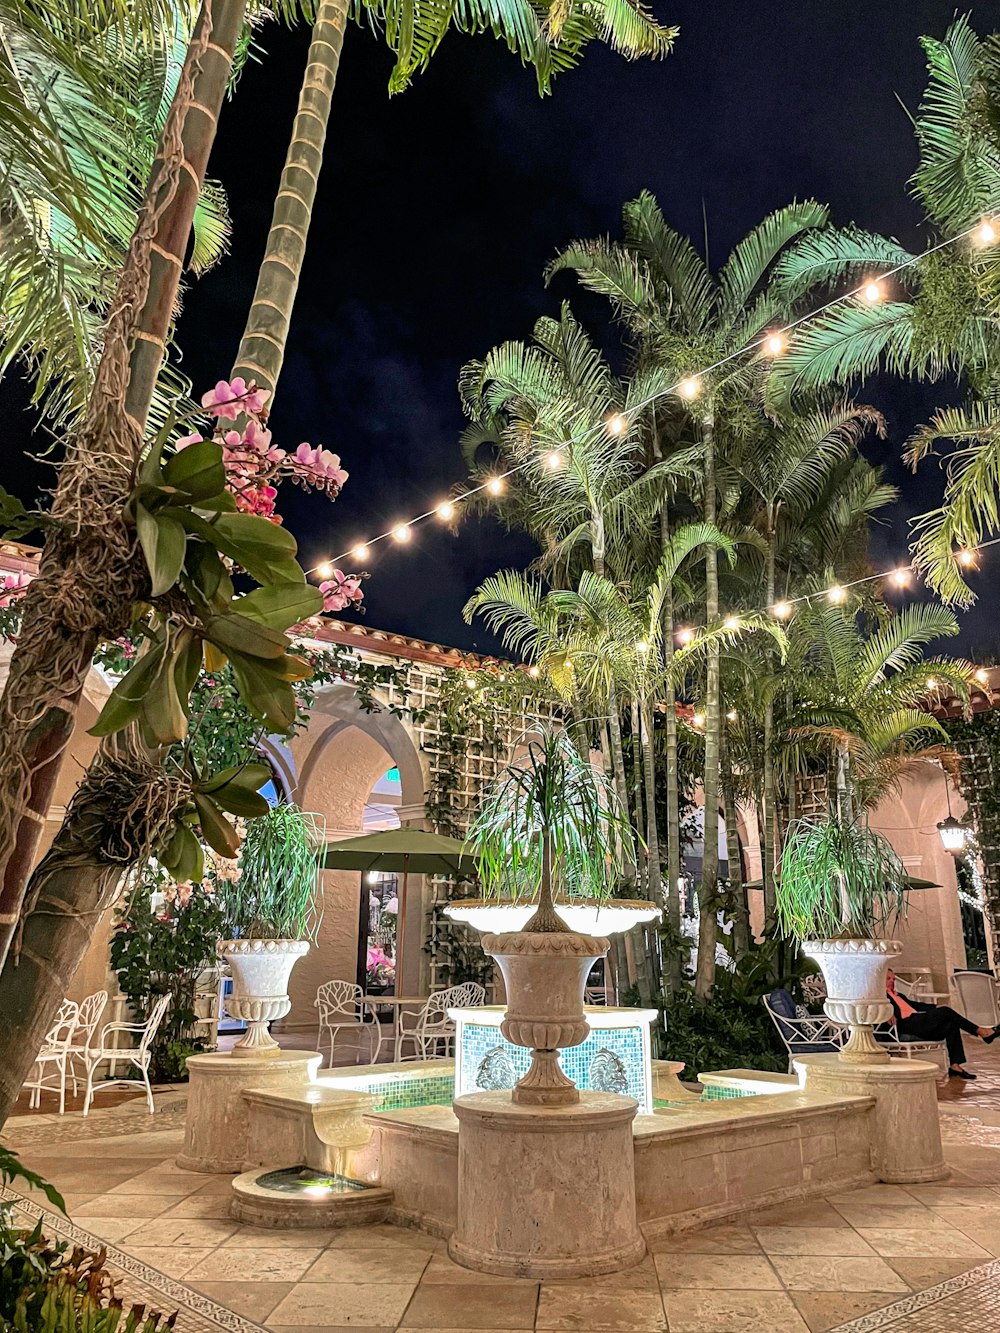 a fountain surrounded by palm trees and lights